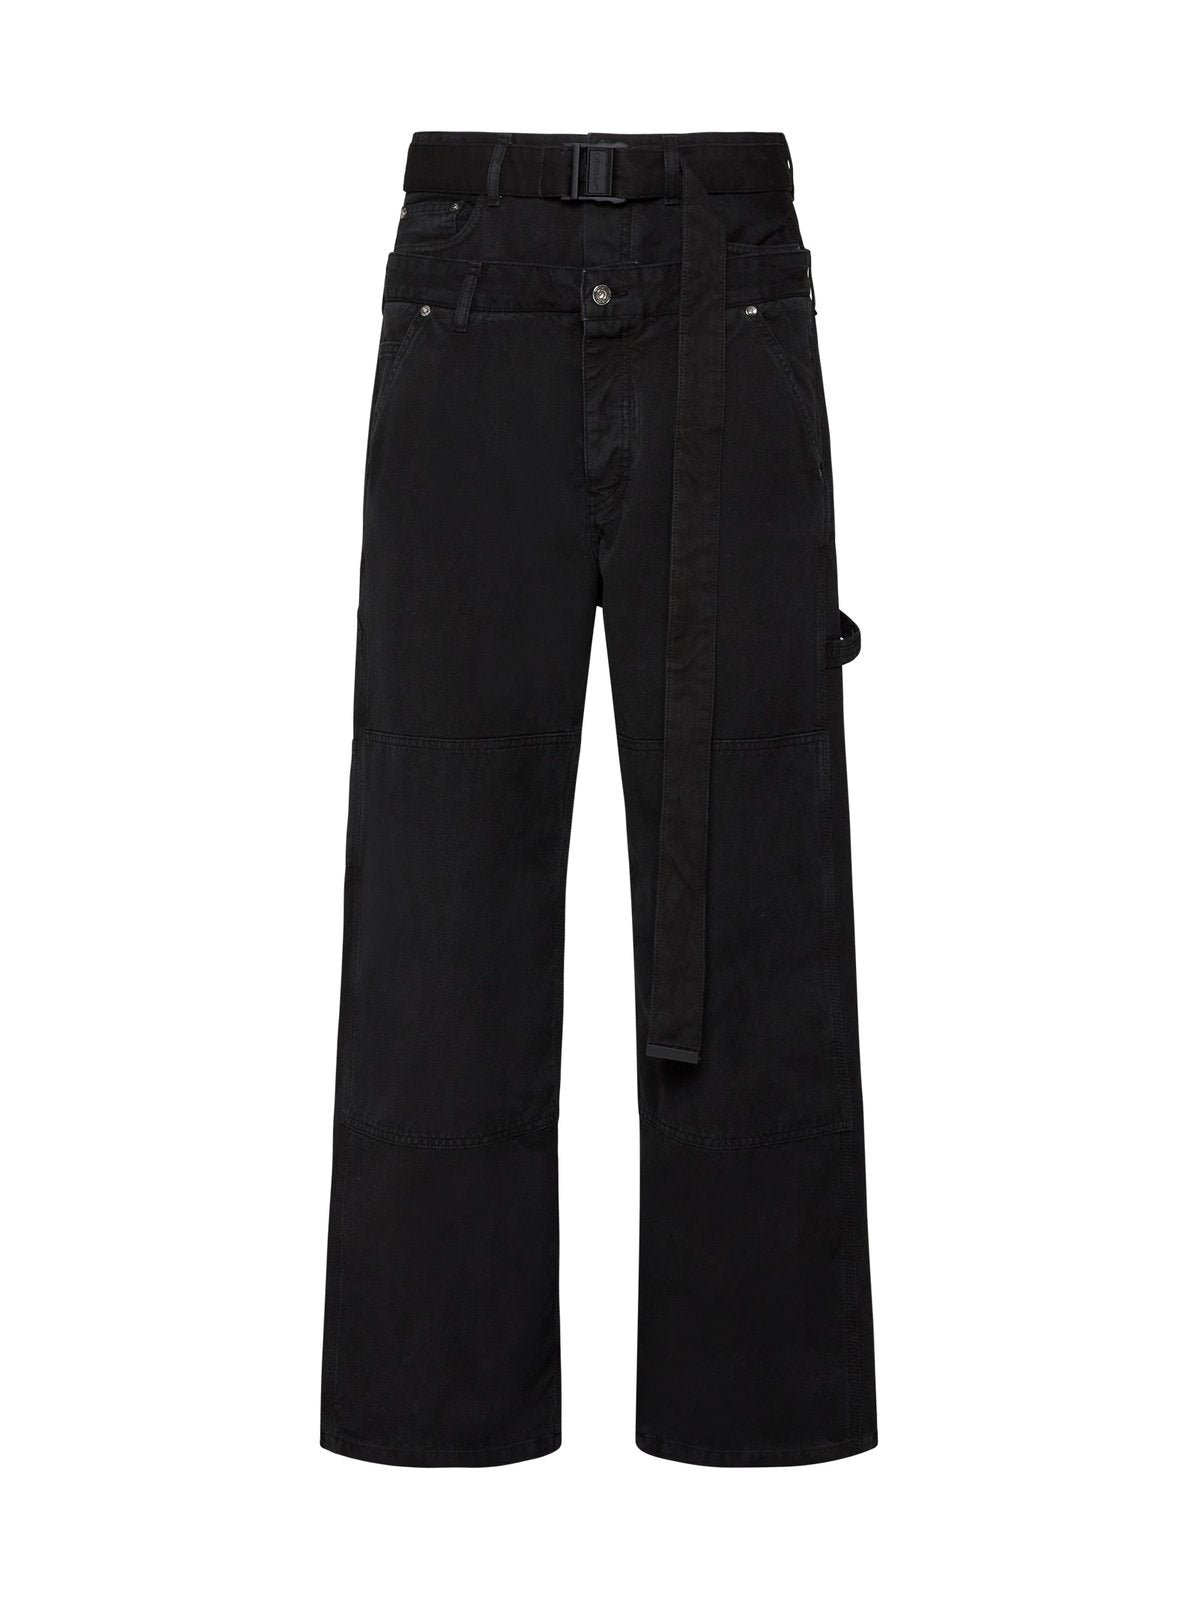 Off-White Logo Patch Wide Leg Jeans